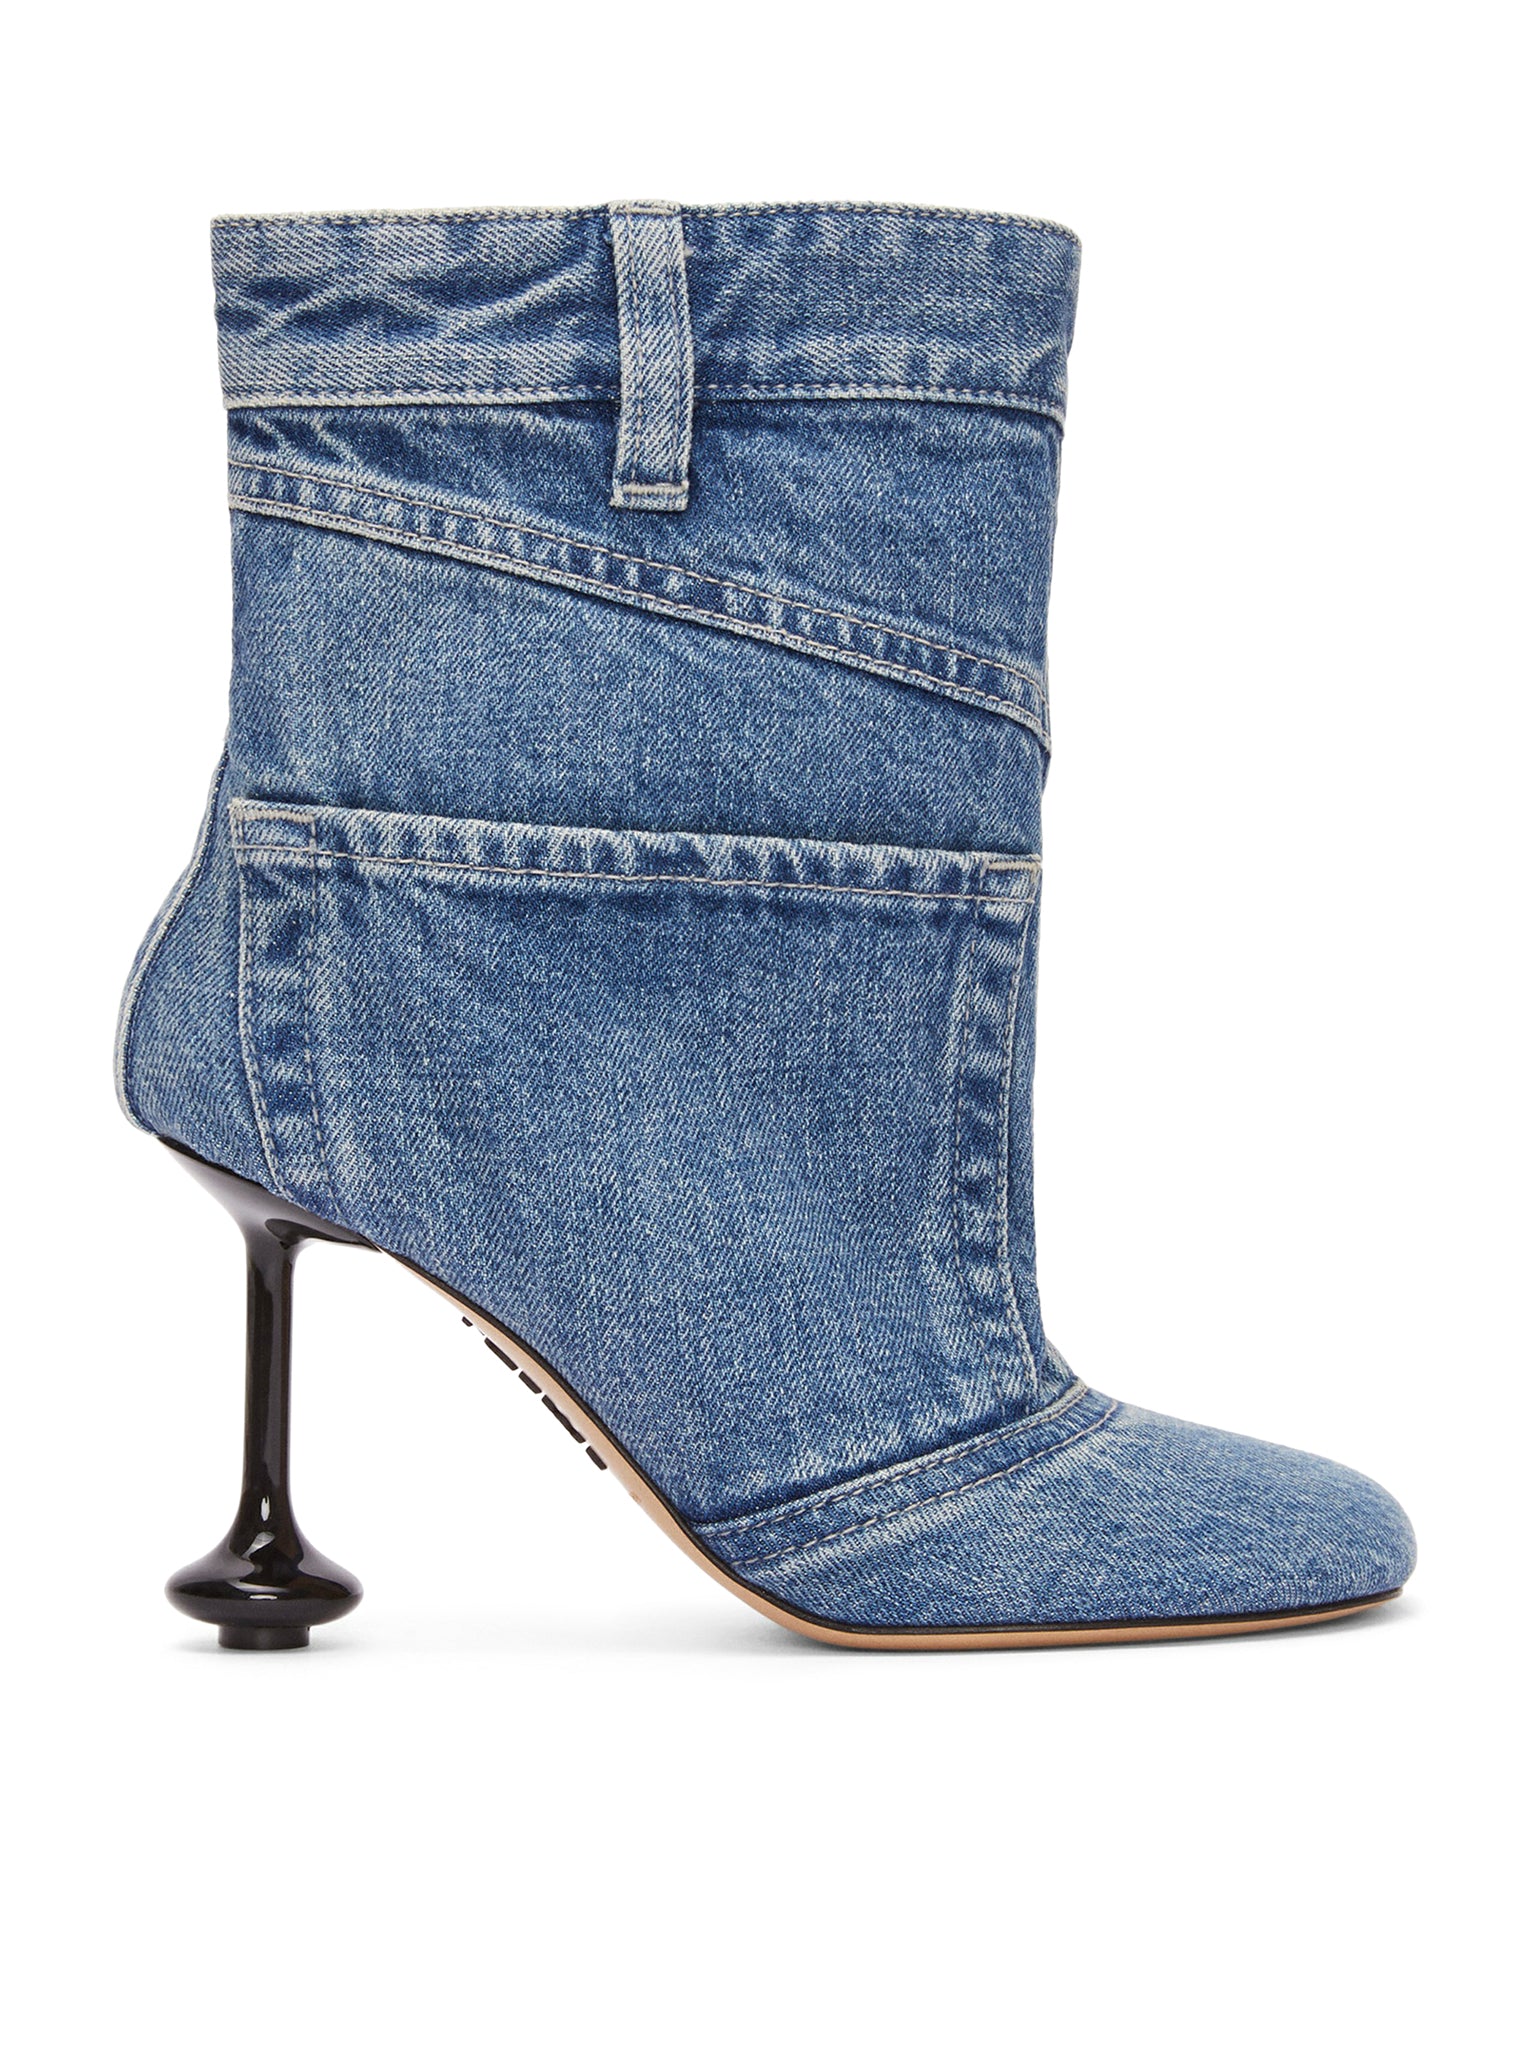 Toy ankle bootie in washed denim